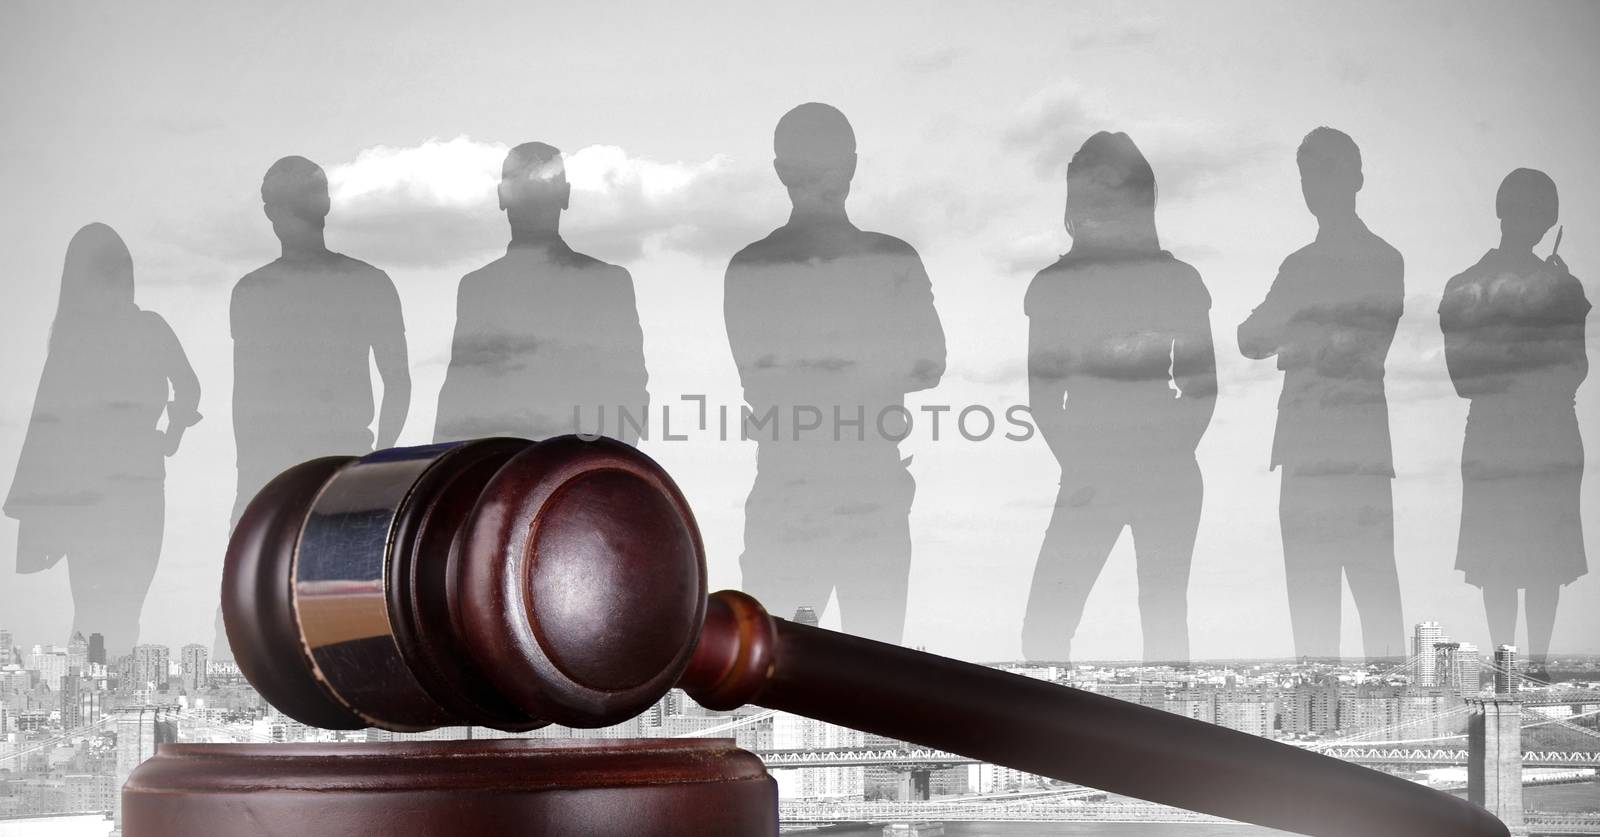 Digital composite of Gavel and people silhouettes over city